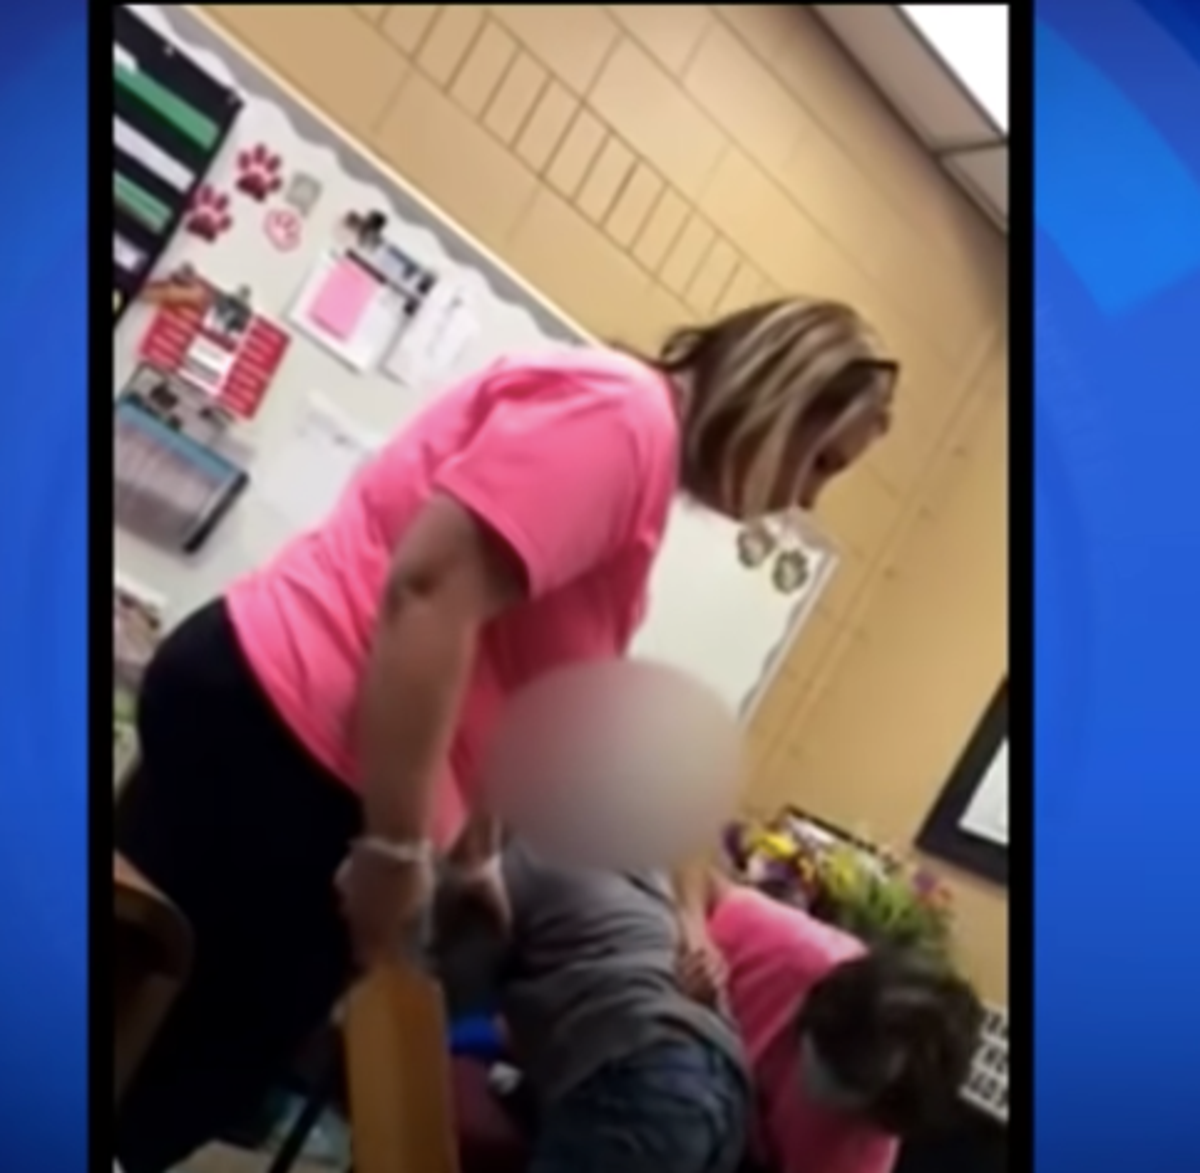 Police teacher on camera spanking child with a paddle | The Independent